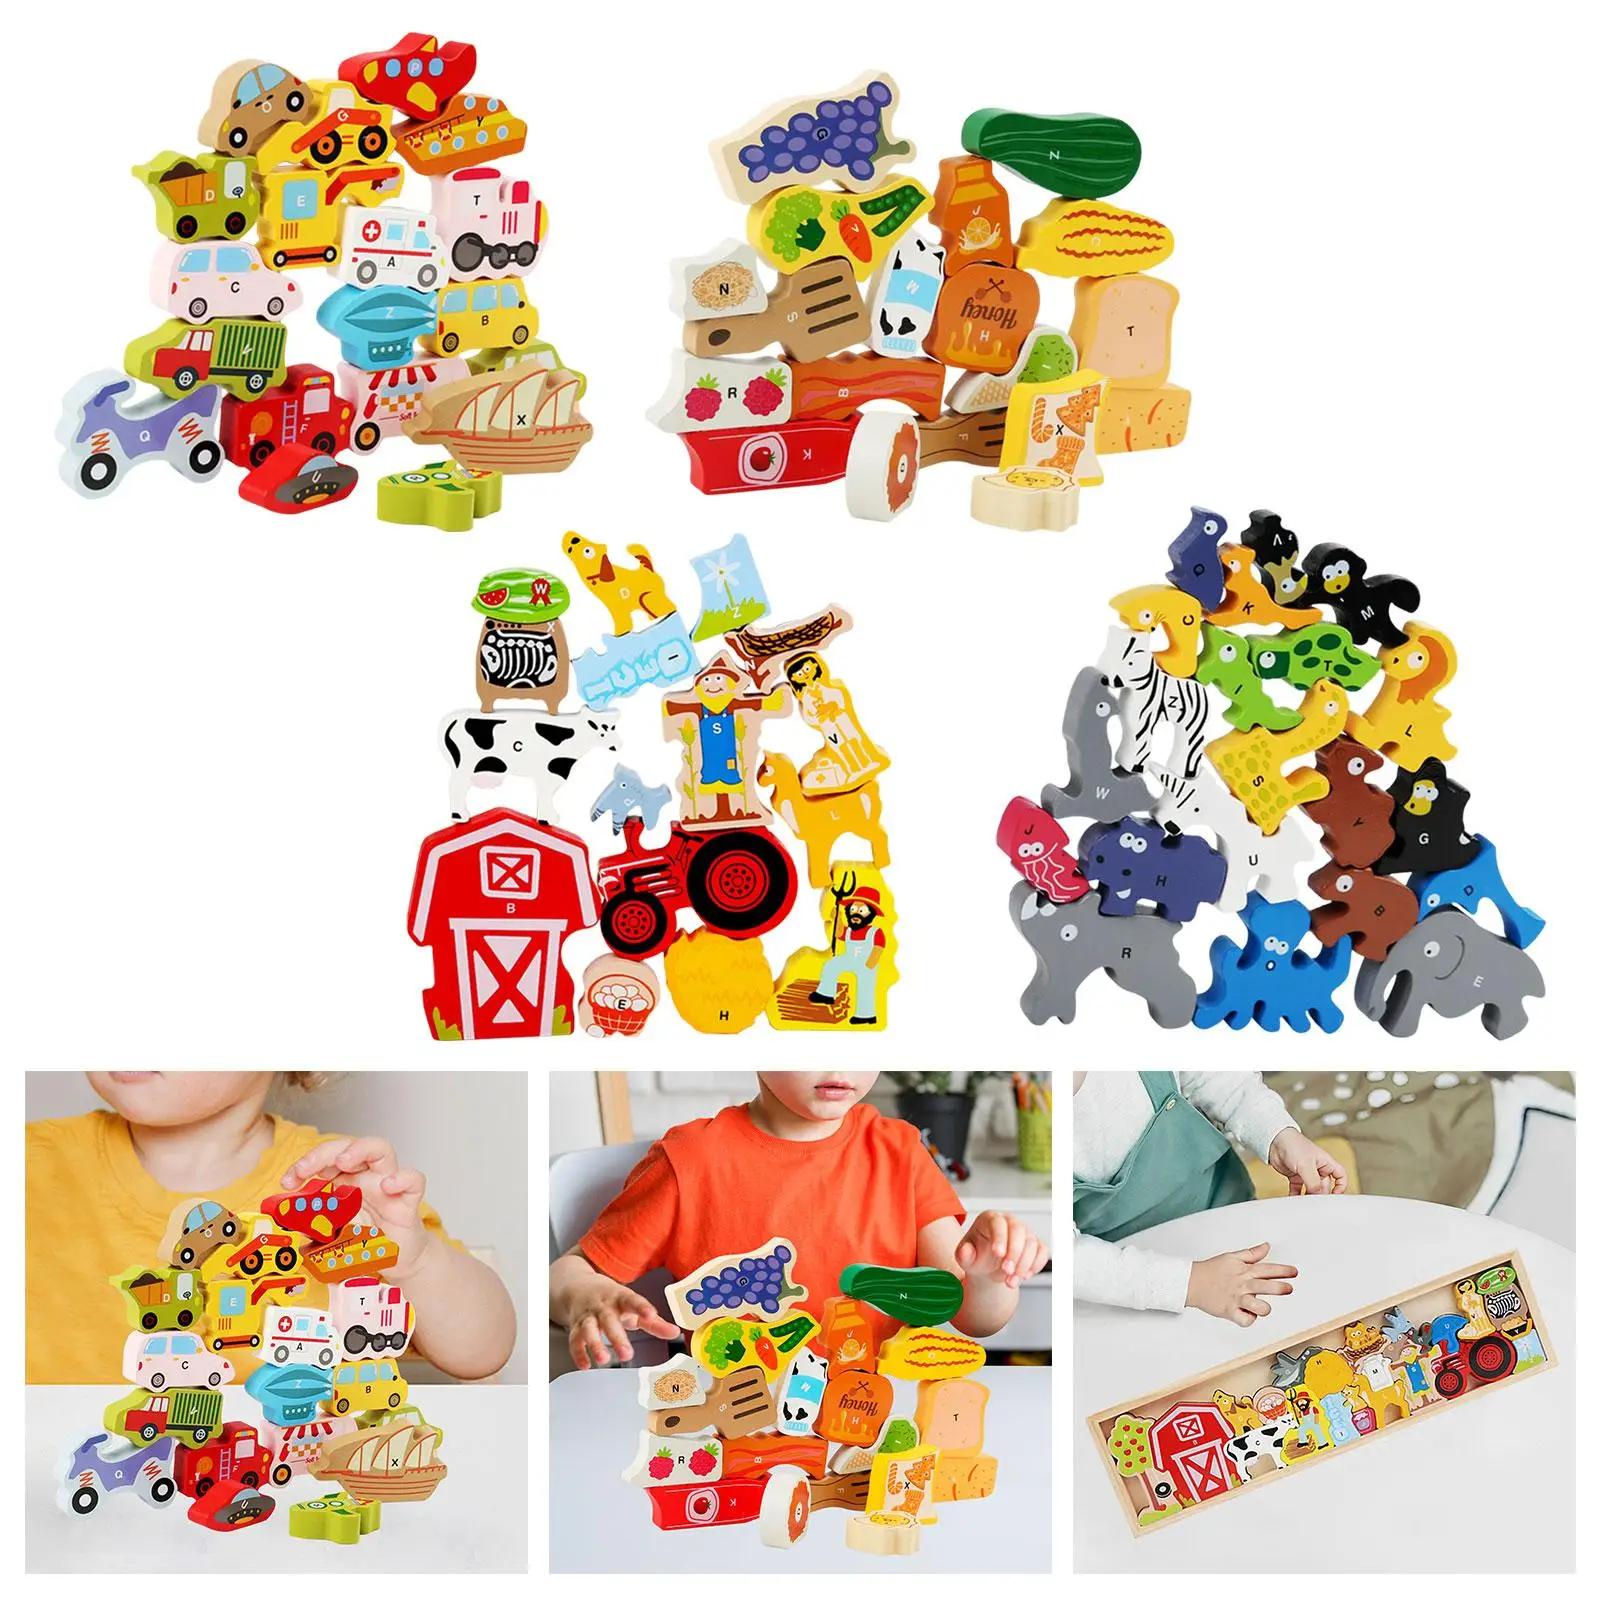 Wood Stacking Block Creativity Thinking Fine Motor Skills logical Hand Eye Coordination Building Wooden balance block for Party